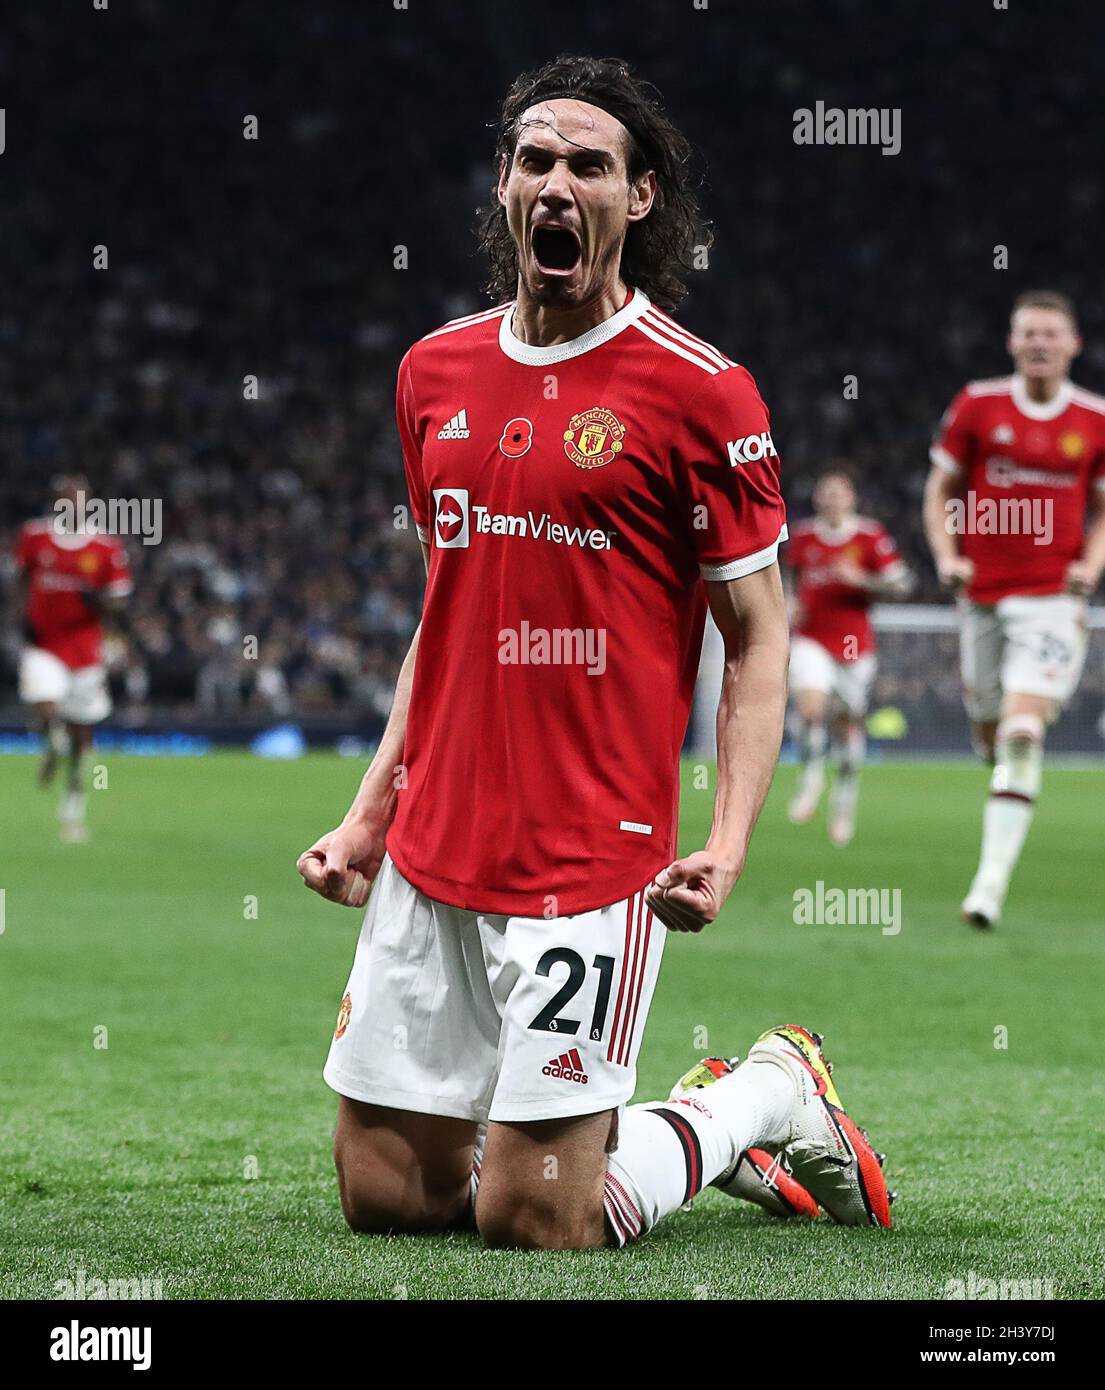 London, England, 30th October 2021. Edinson Cavani of Manchester United celebrates after scoring to make it 2-0 during the Premier League match at the Tottenham Hotspur Stadium, London. Picture credit should read: Paul Terry / Sportimage Credit: Sportimage/Alamy Live News Stock Photo